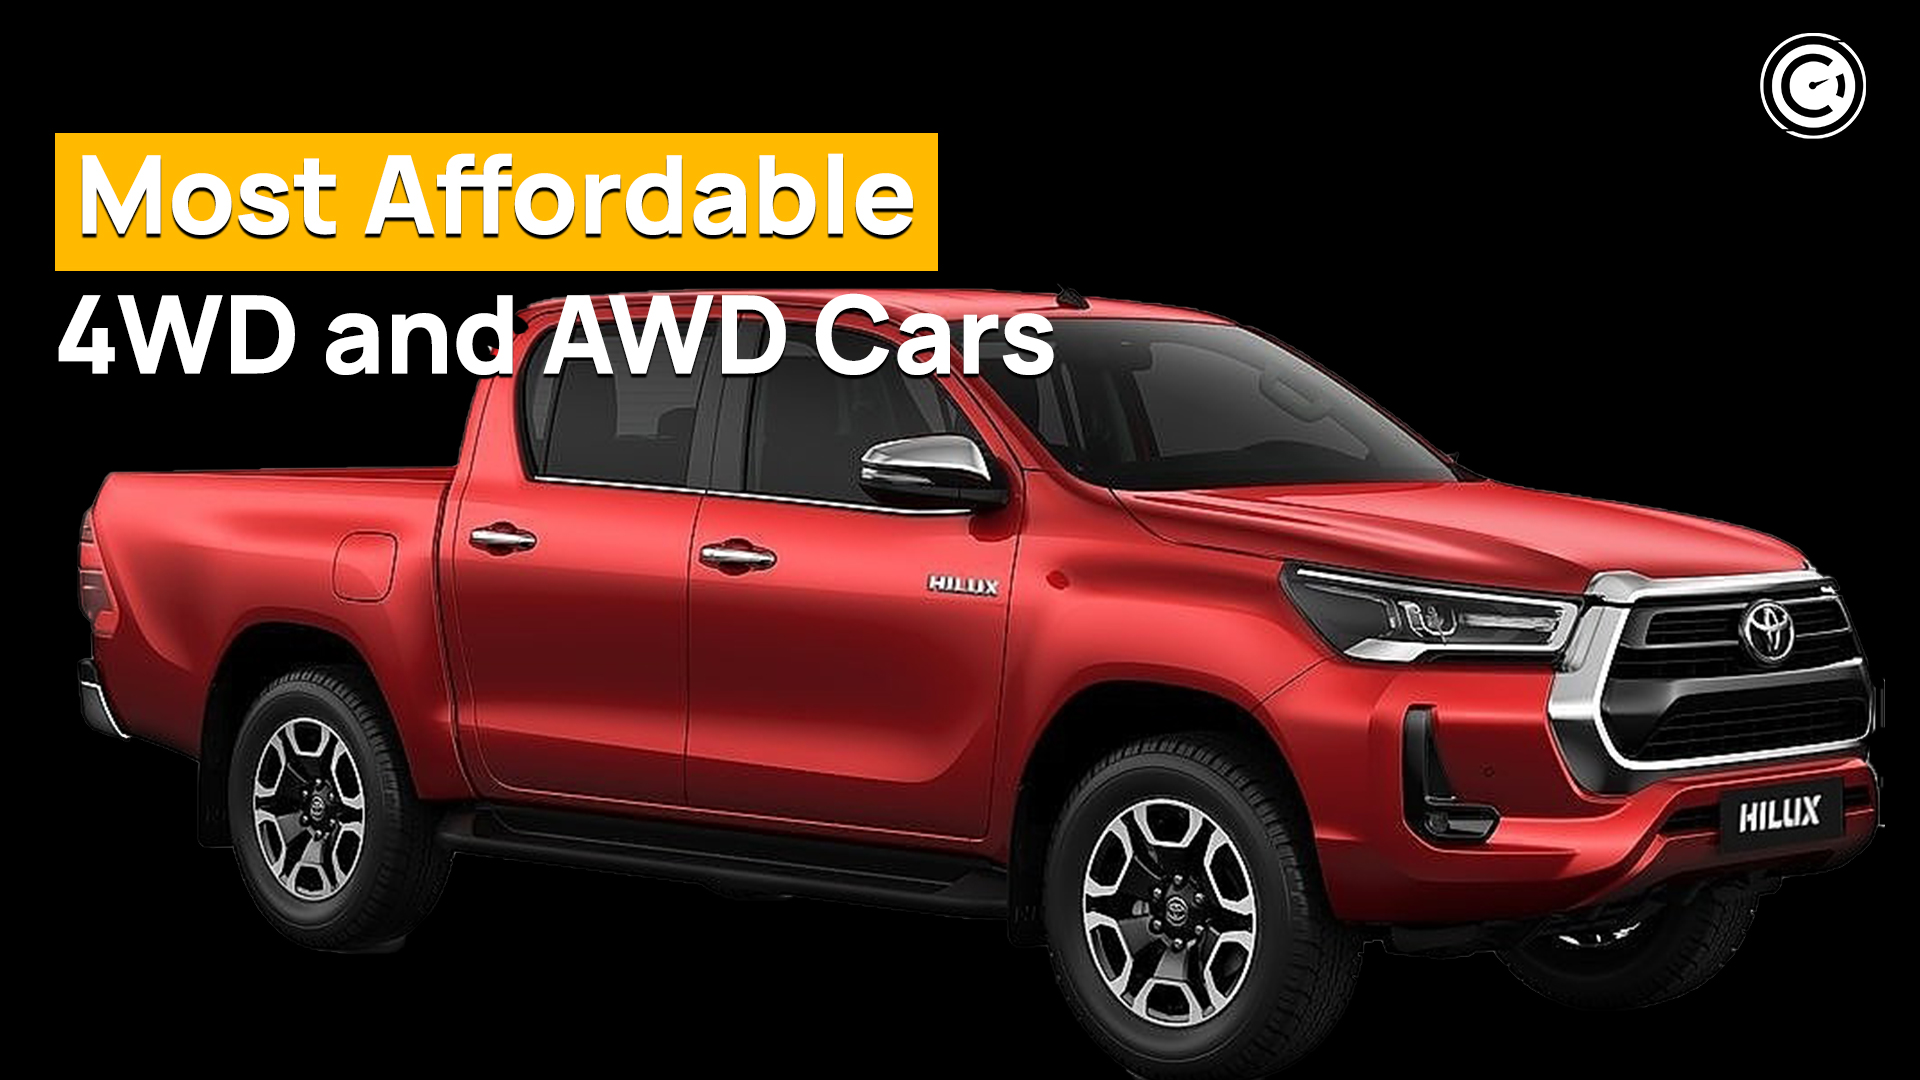 Top 13 Most Affordable 4WD and AWD Cars GaragePro Blog